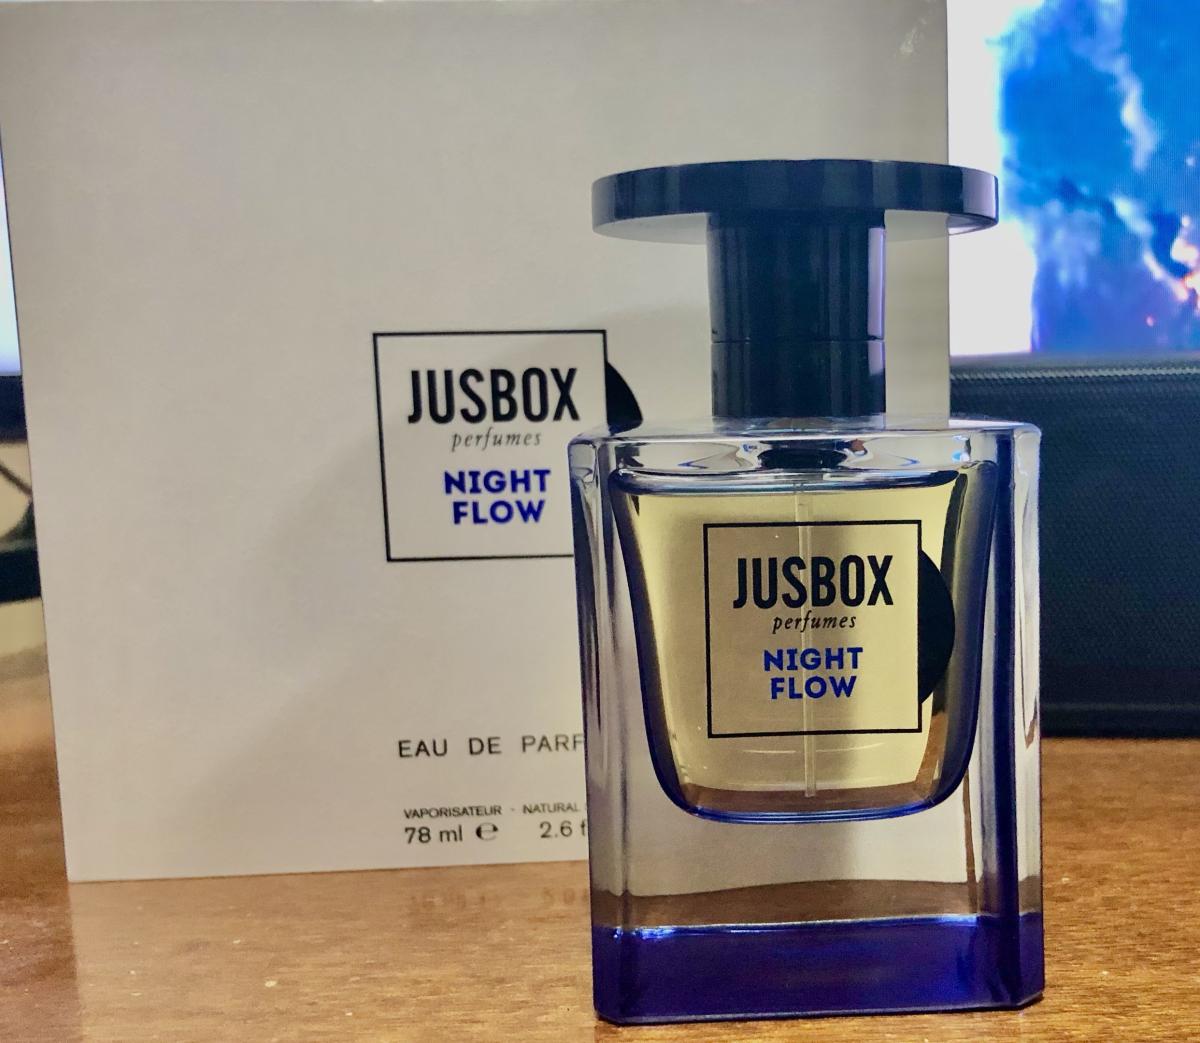 Night Flow Jusbox perfume - a fragrance for women and men 2020